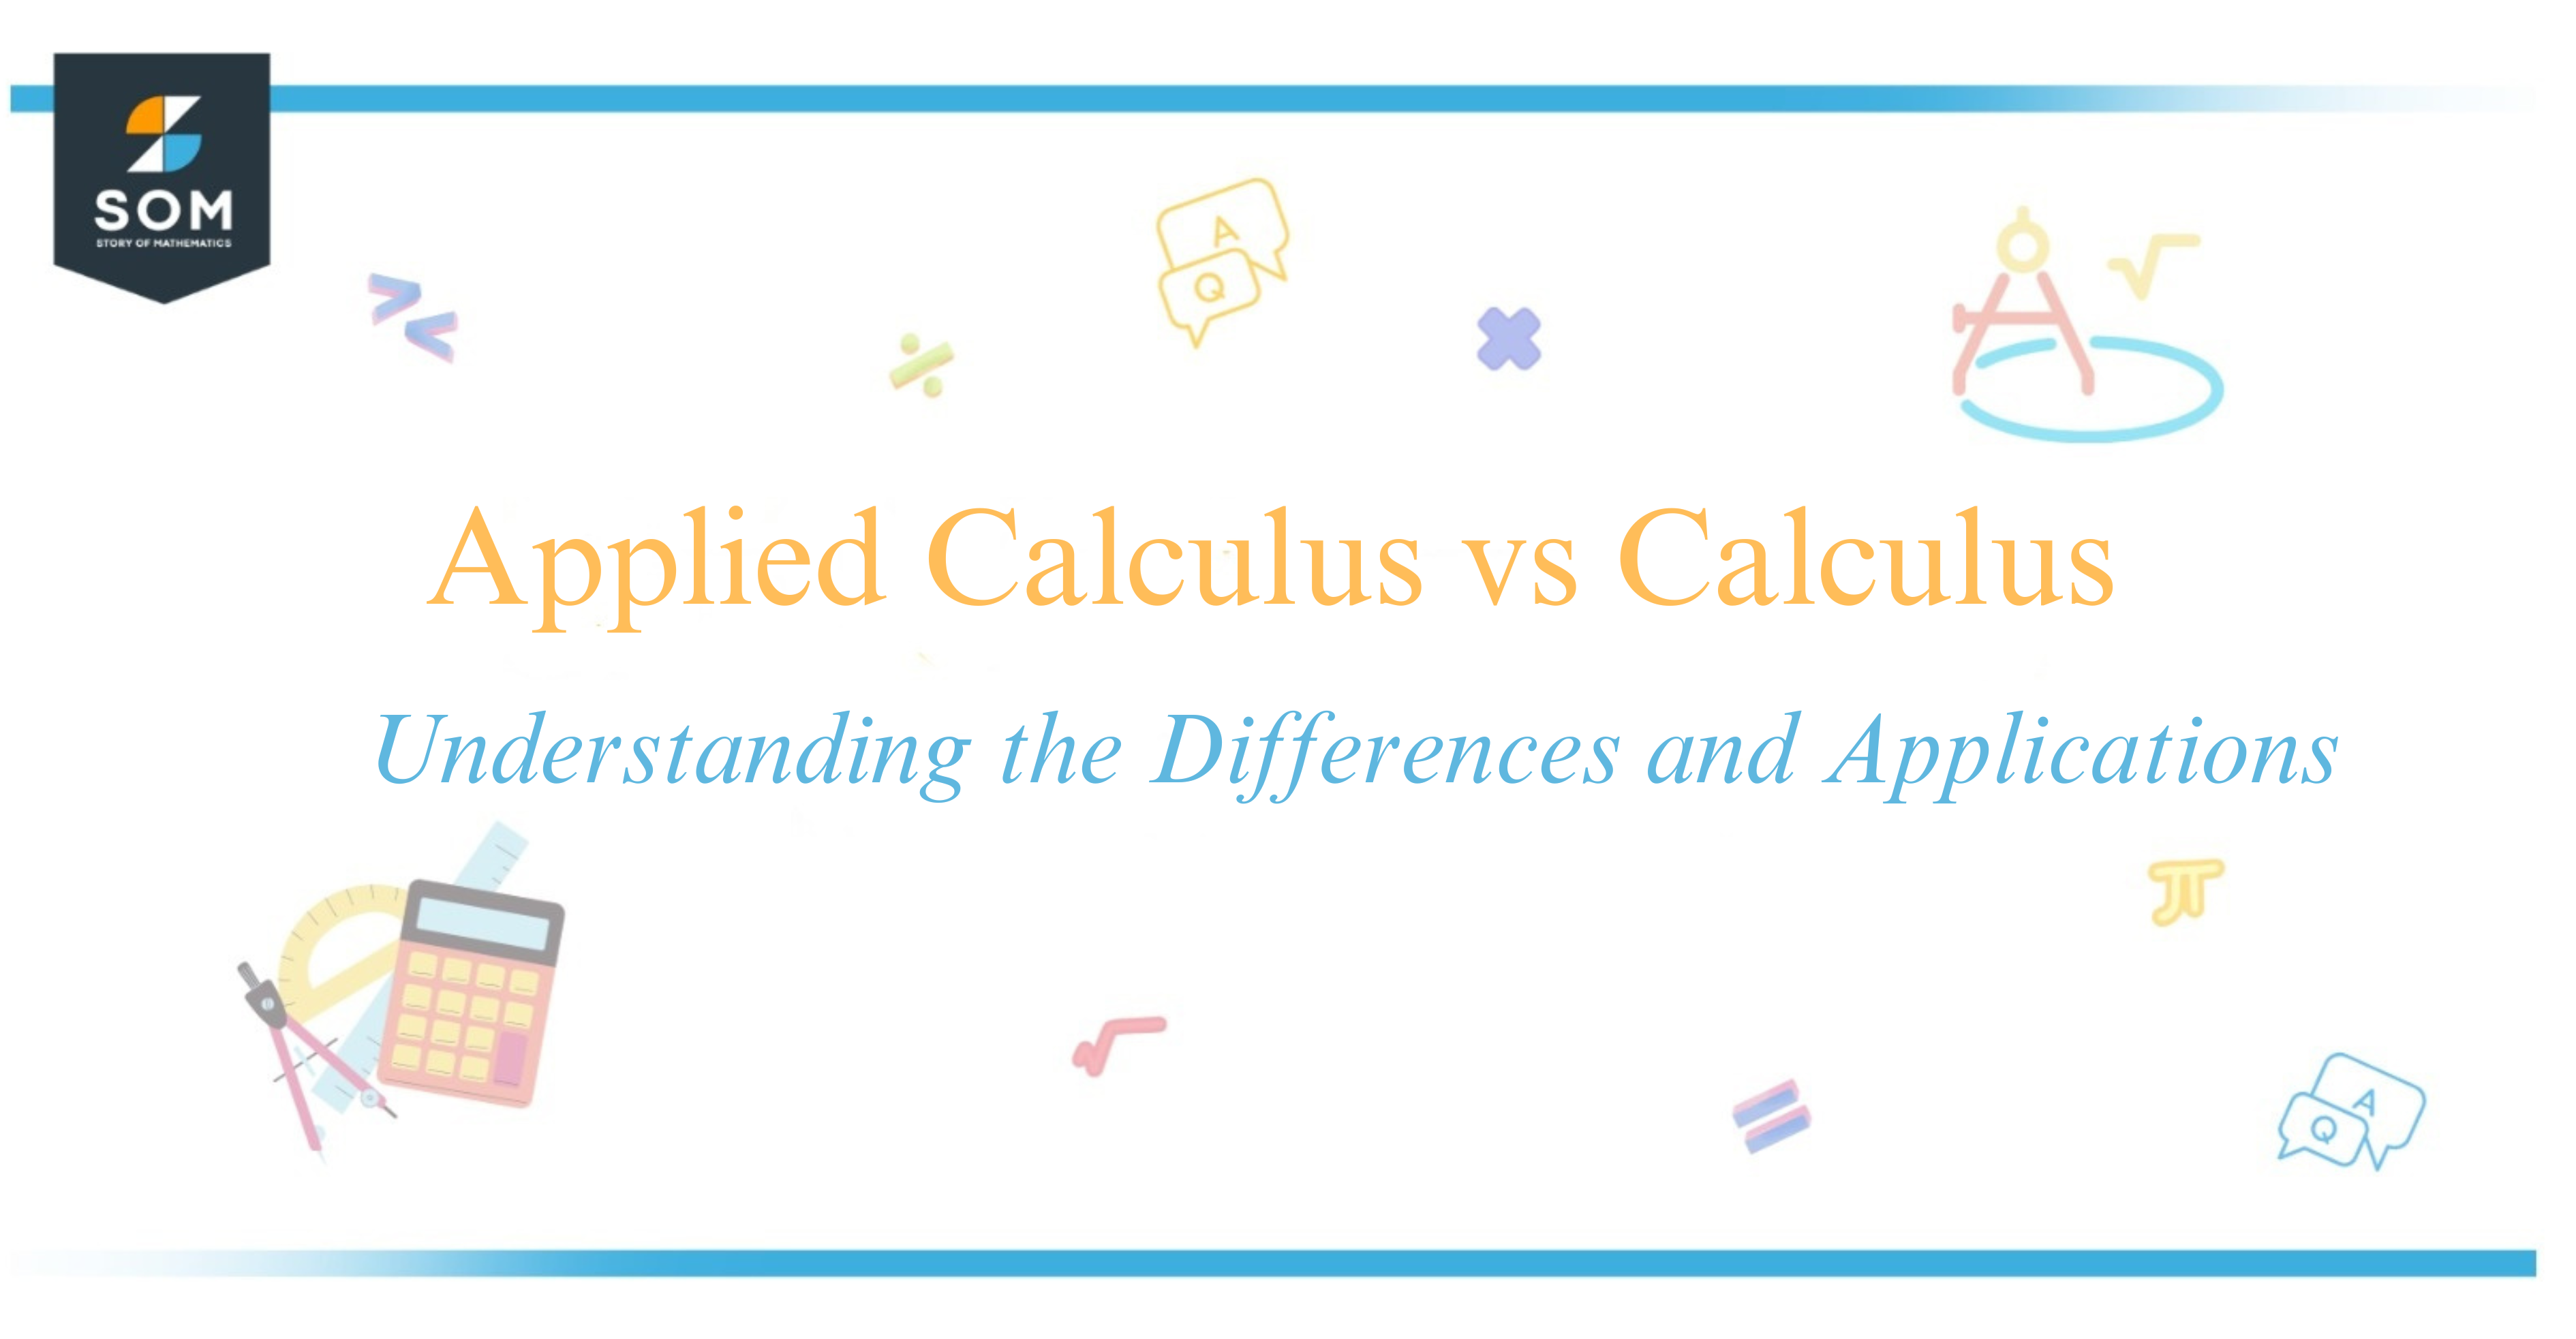 Applied Calculus vs Calculus Understanding the Differences and Applications